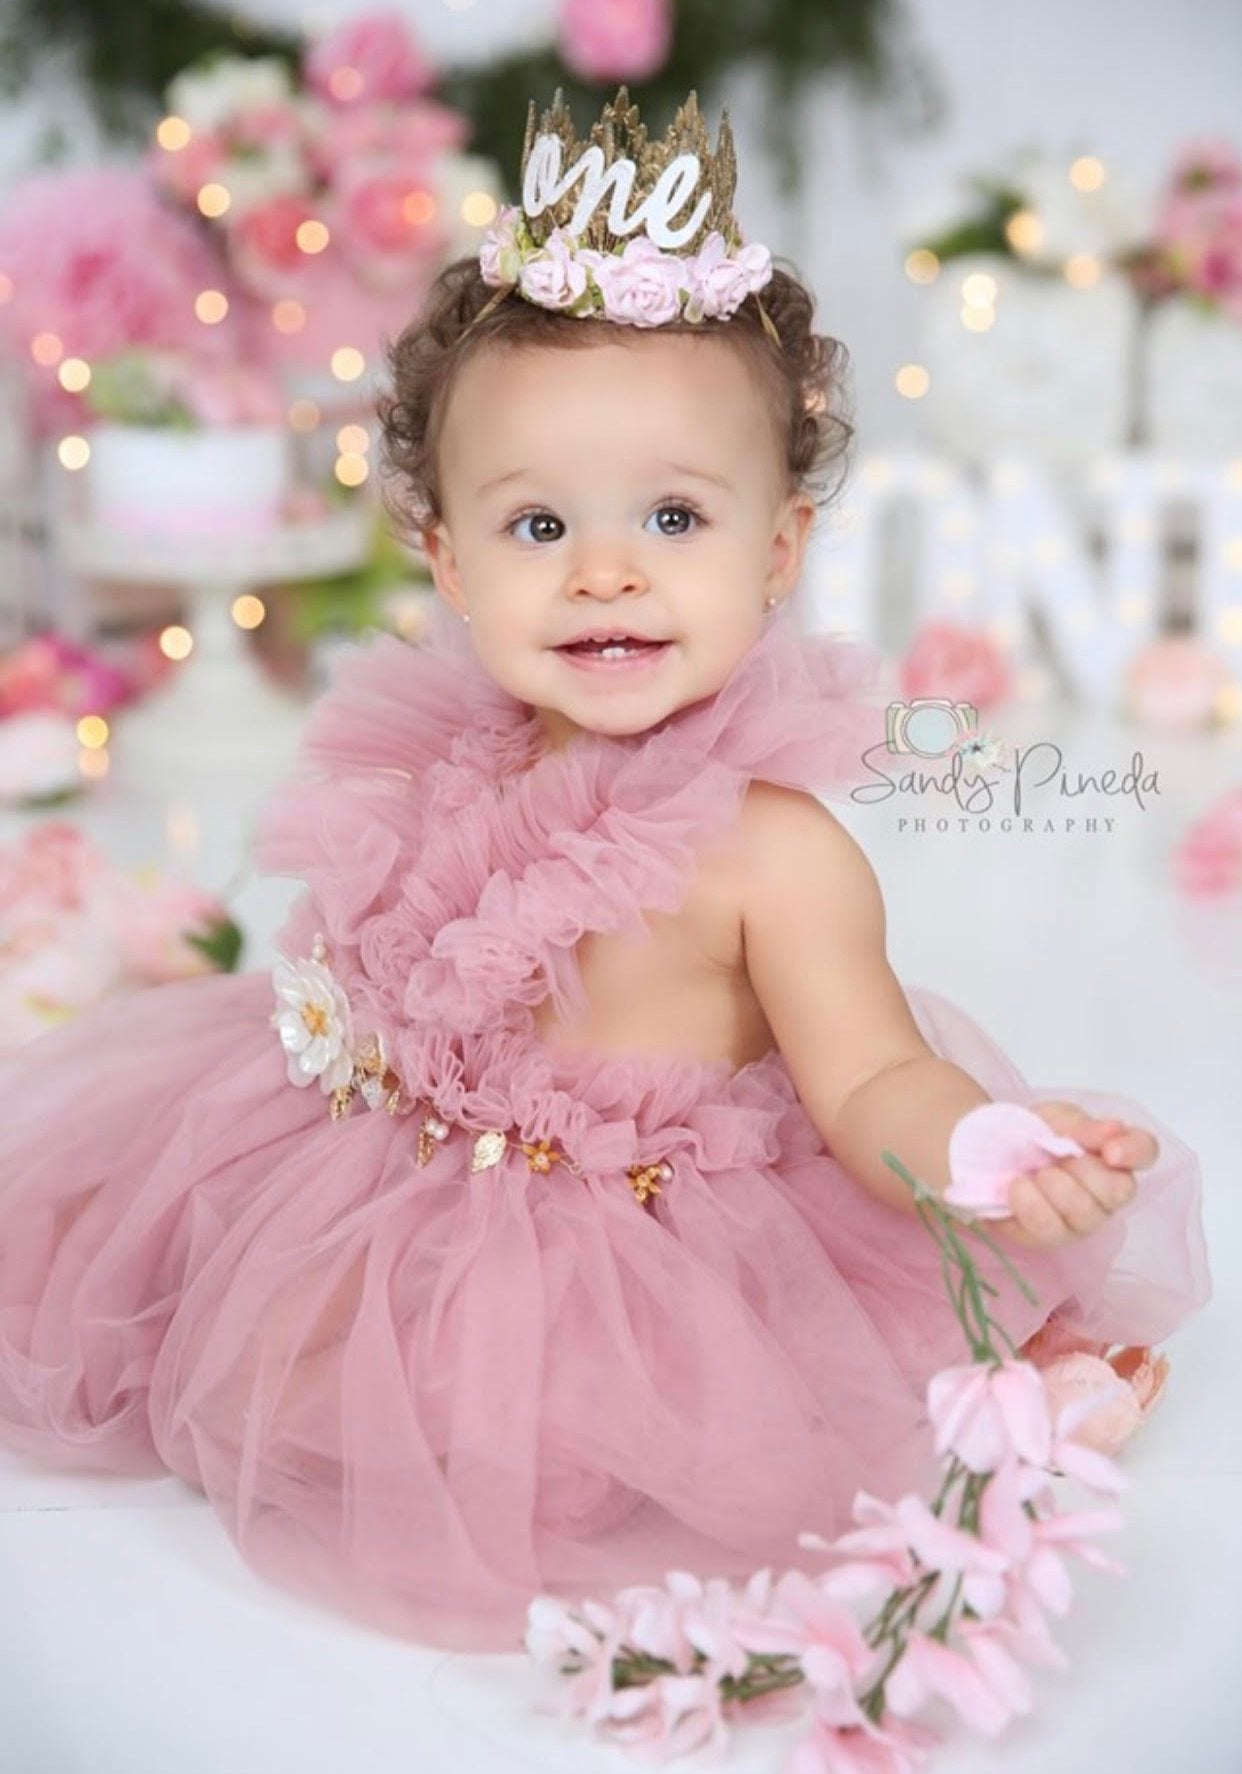 Cute Baby Images | Baby gowns girl, Cute baby girl wallpaper, Baby girl  birthday dress